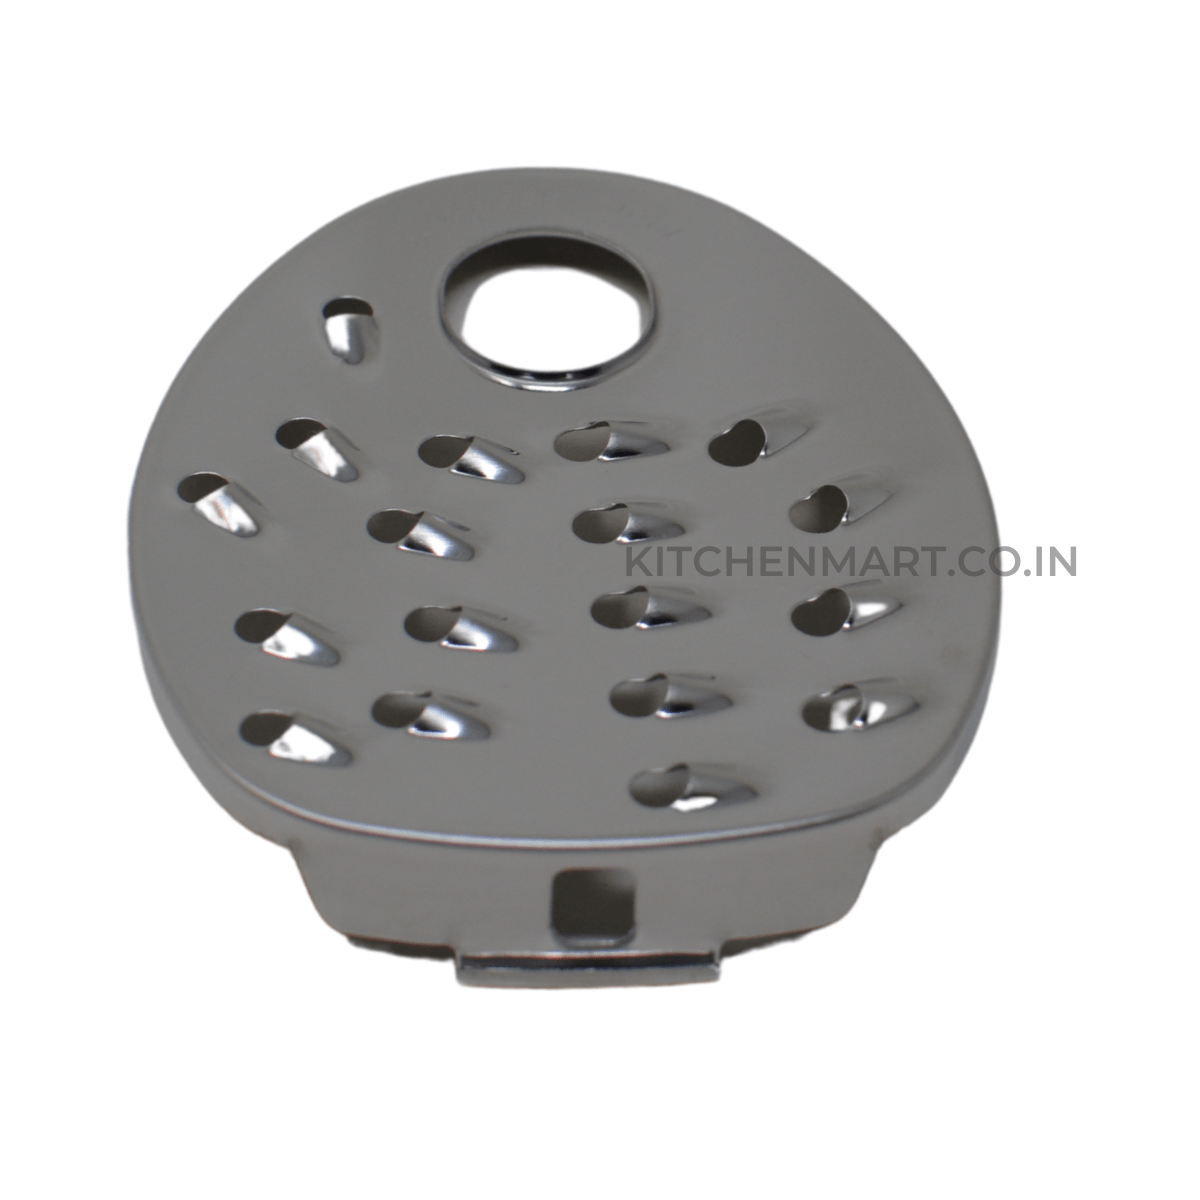 Grating Blade attachment suitable for Preethi Zodiac Mixer Grinder - KITCHEN MART